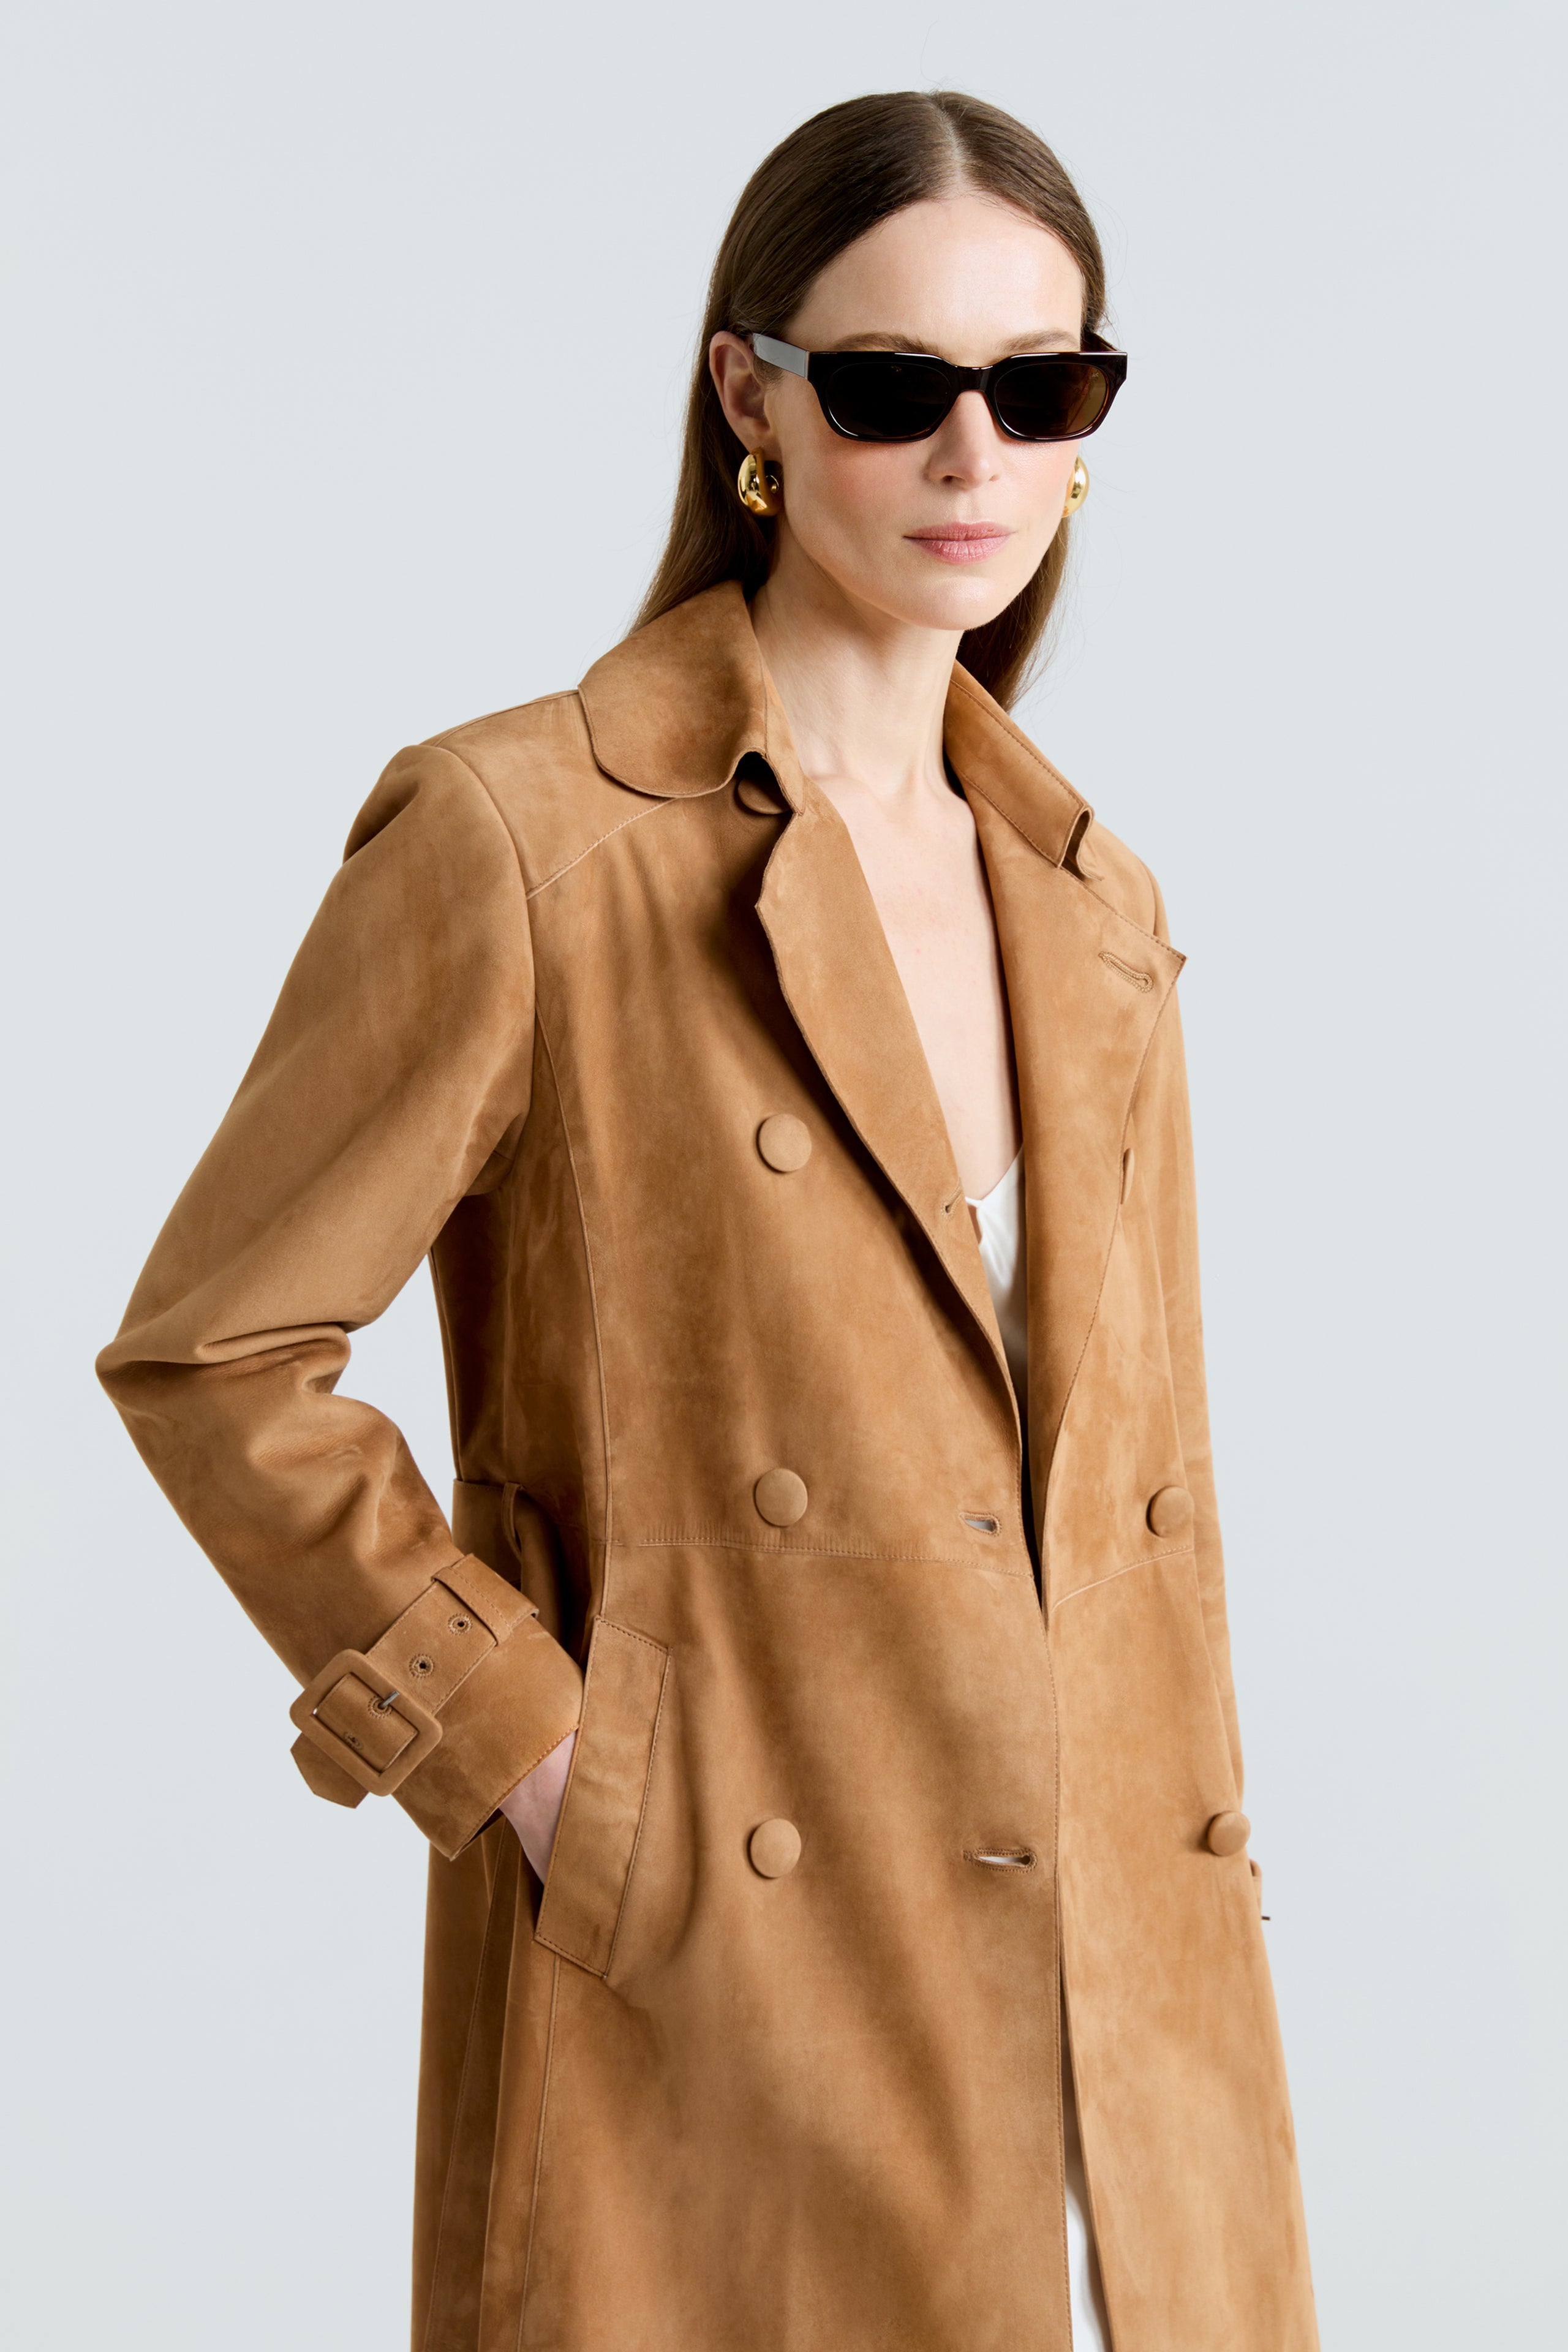 Model is wearing the Tate Beige Everyday Suede Trench Coat Close Up